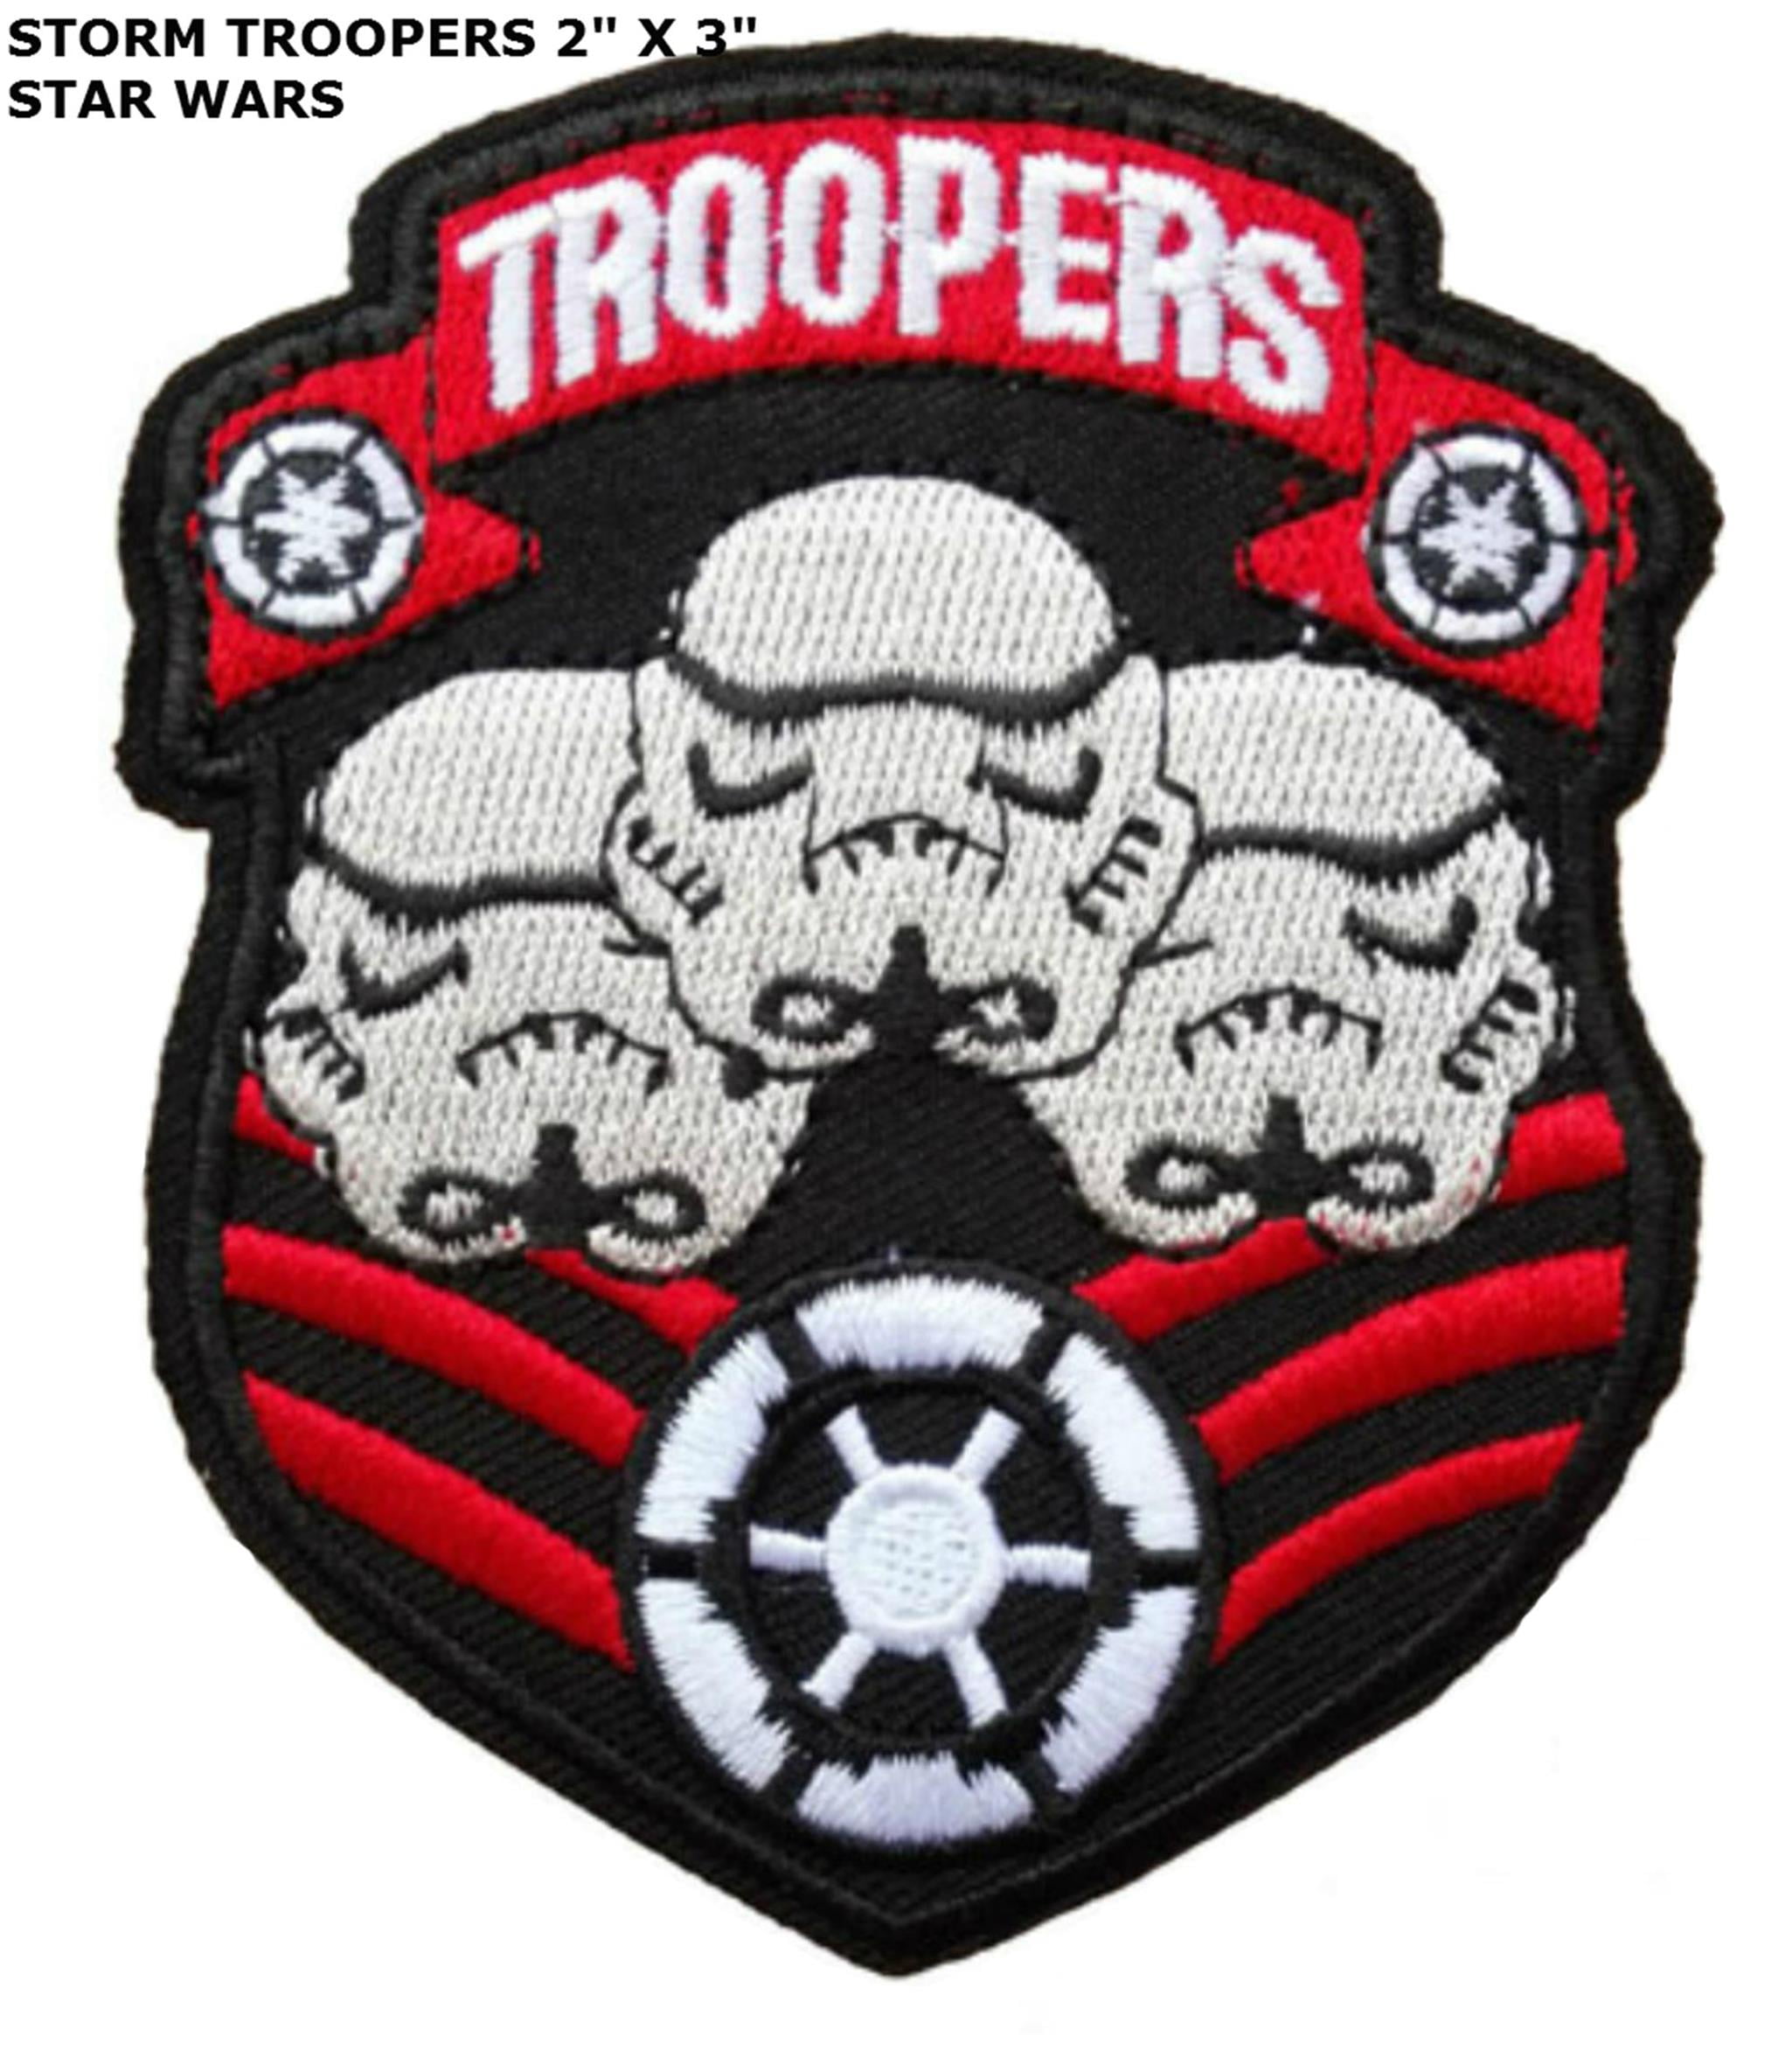 STAR WARS Storm Trooper  Embroidered Iron On Sew On Patch Badge For Clothes etc